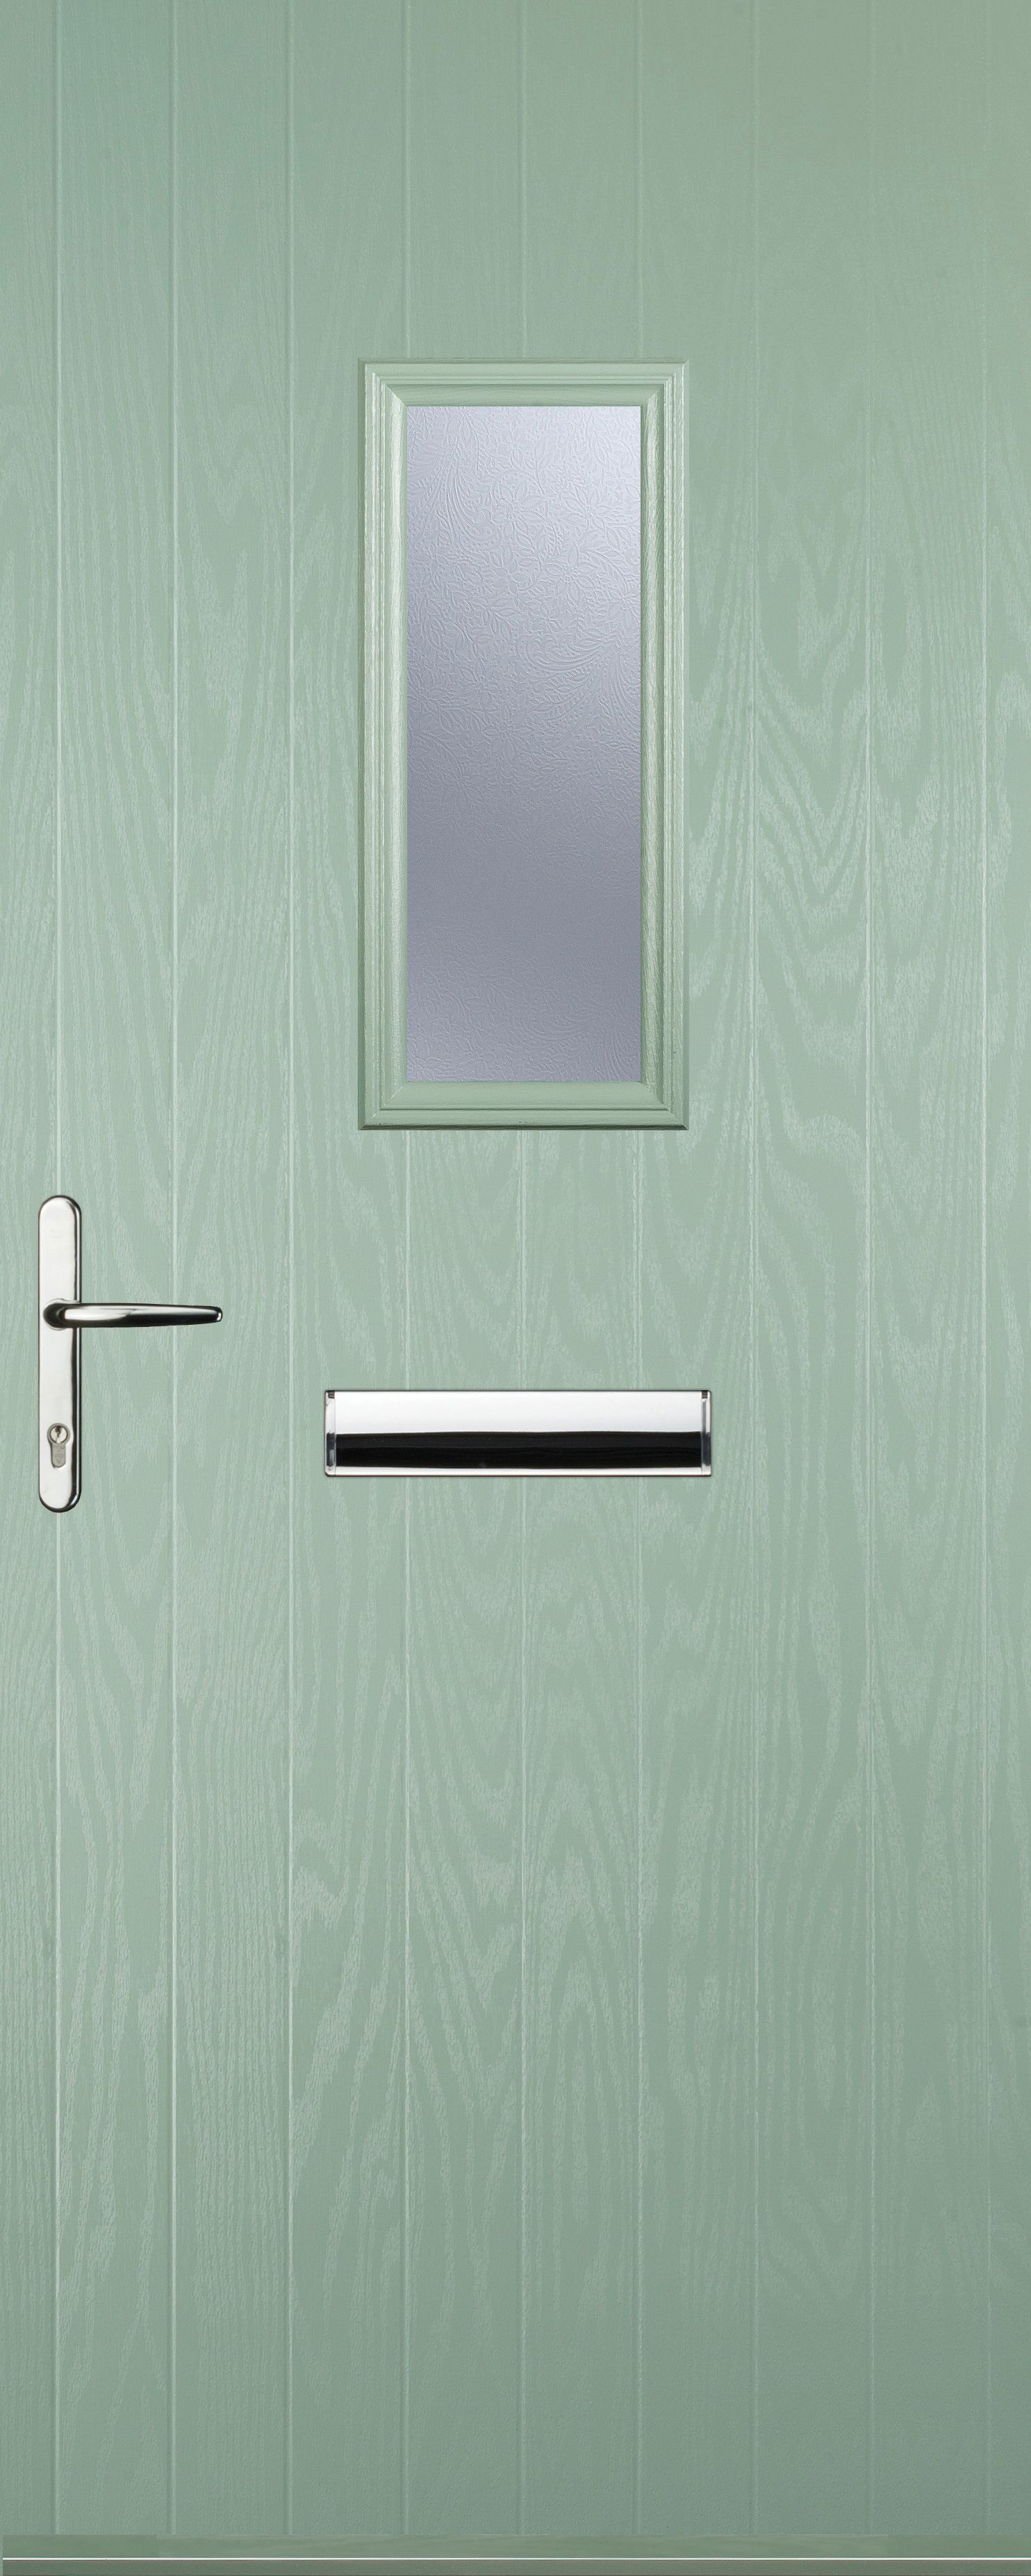 Image of Euramax 1 Square Right Hand Chartwell Green Composite Door - 840 x 2100mm